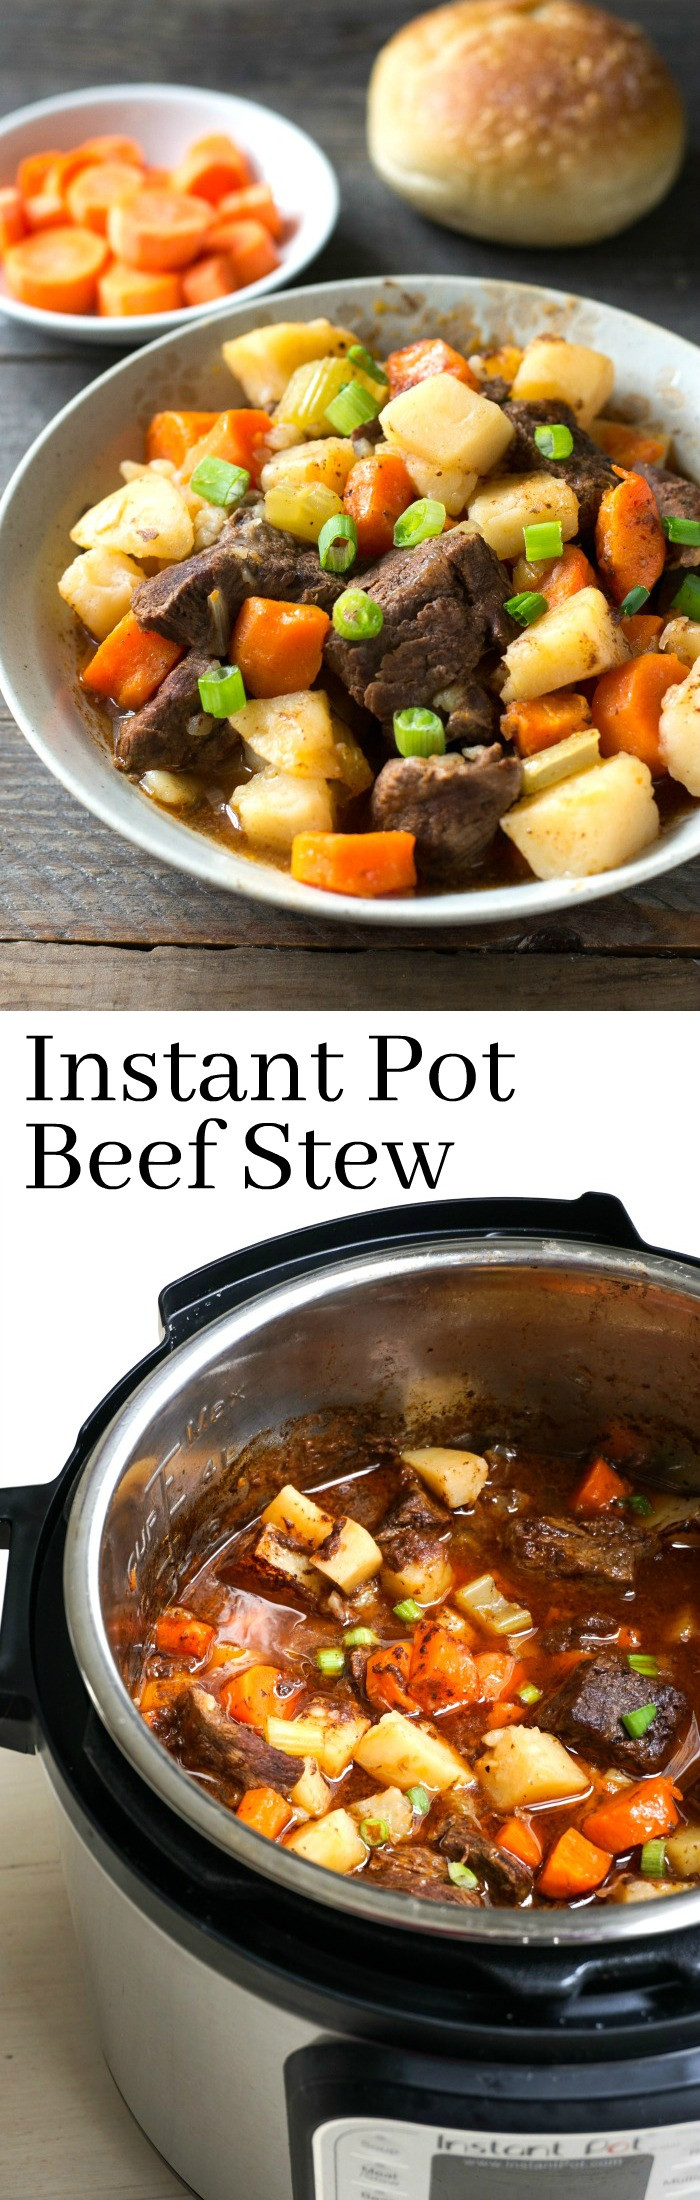 Healthy Beef Stew Recipe
 The Best Instant Pot Beef Stew Recipe Easy Family Dinner